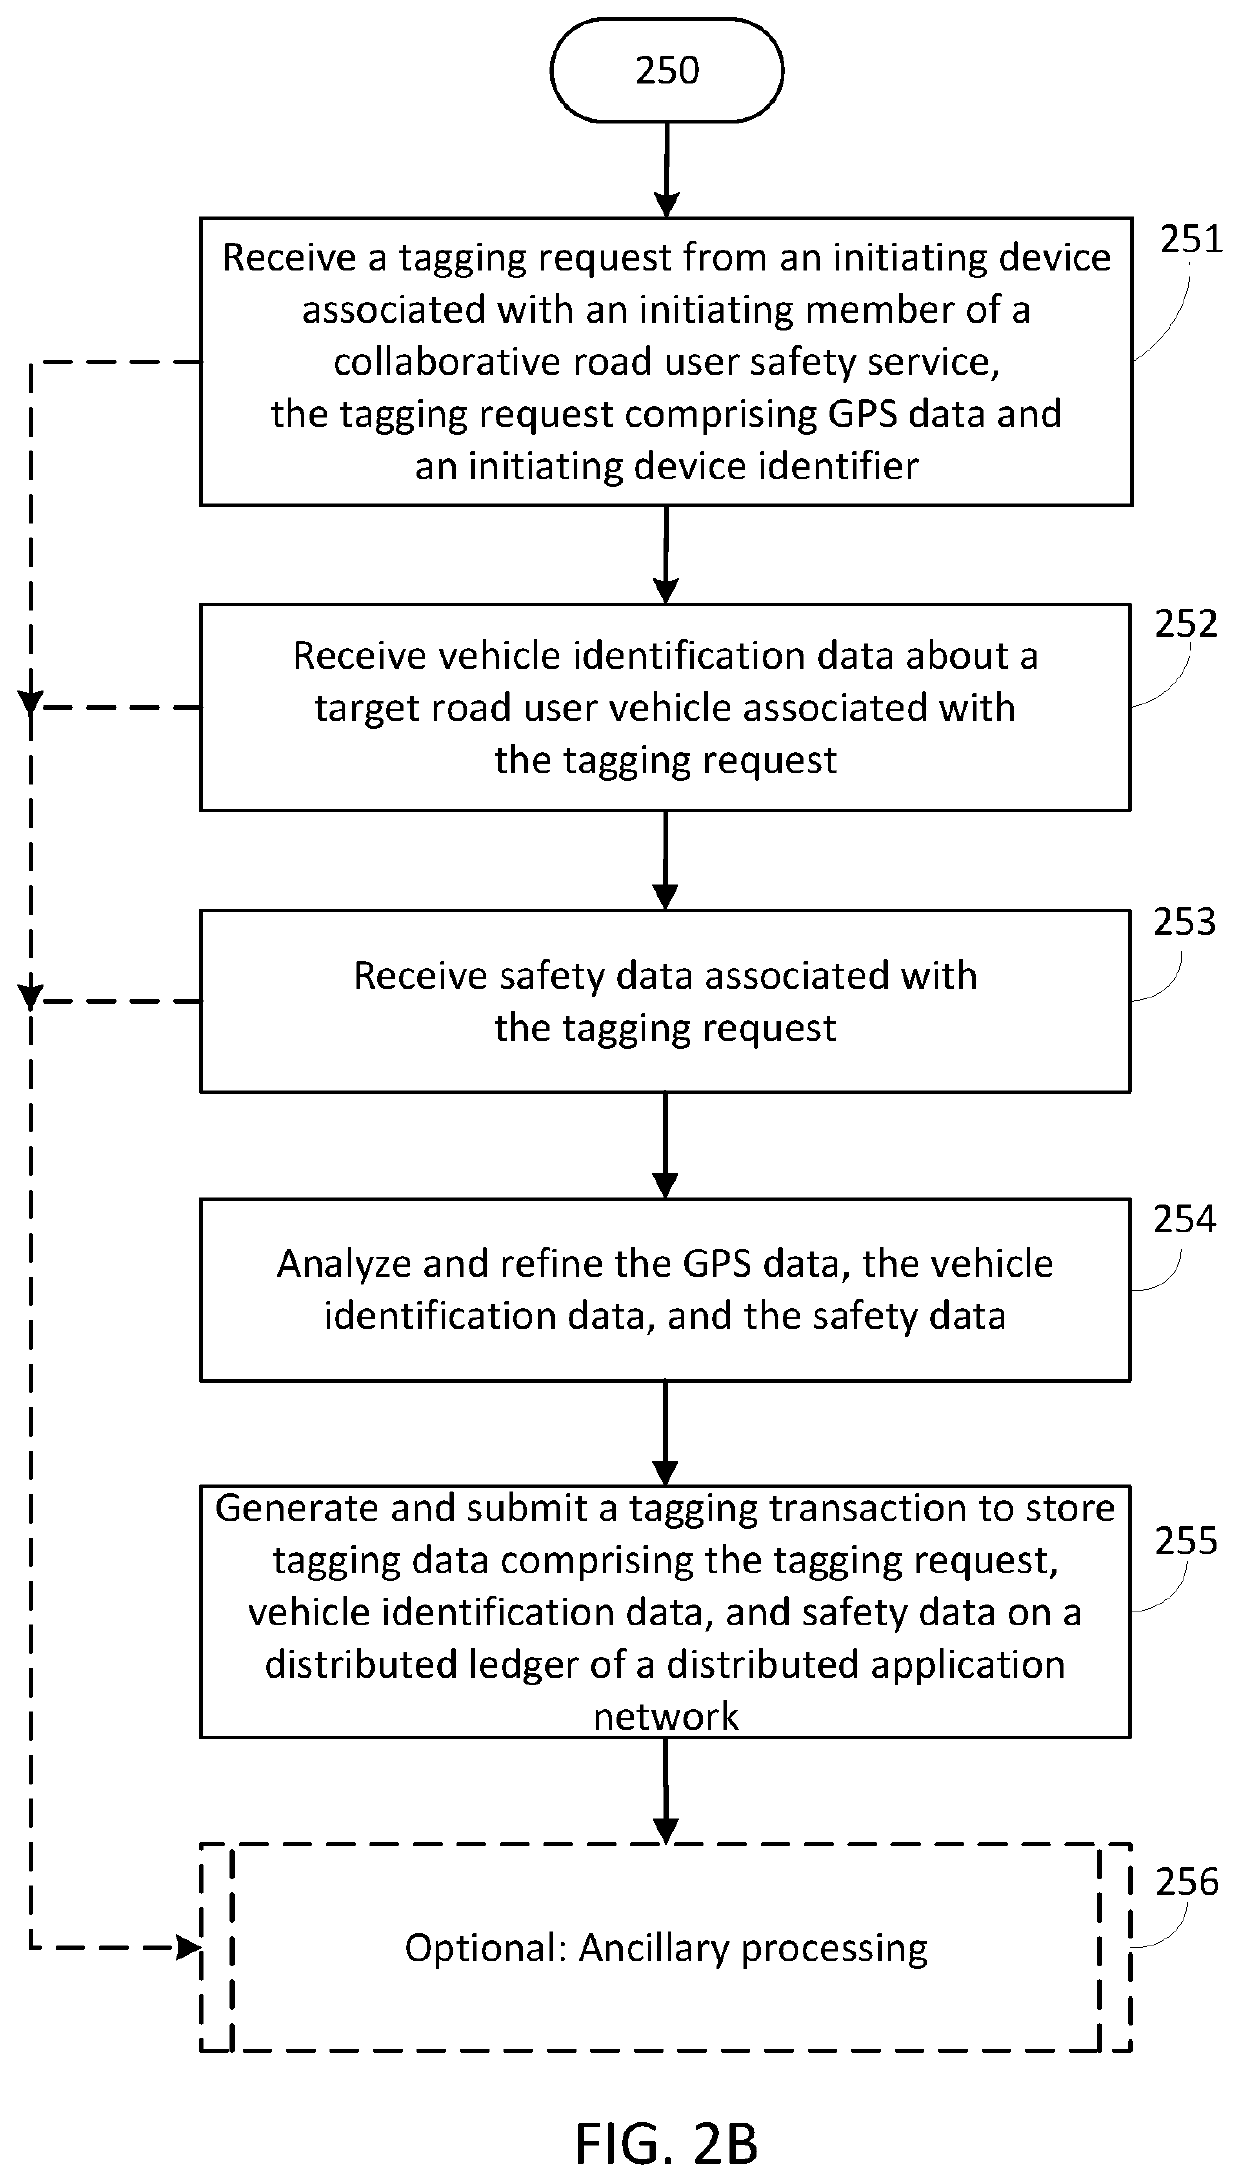 Systems and methods for collaborative road user safety